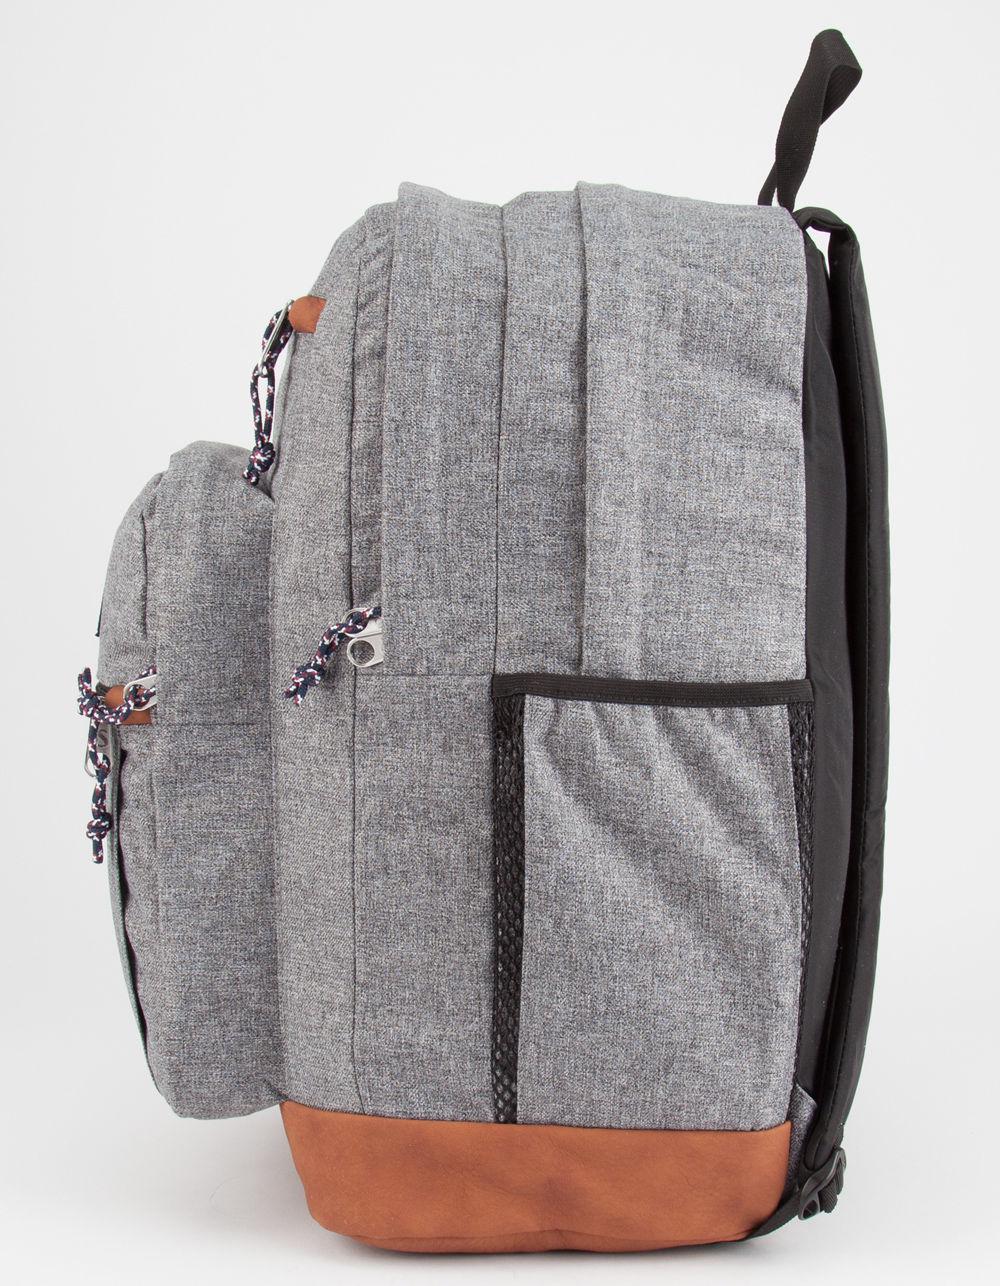 Jansport Cool Student Backpack in Grey (Gray) for Men - Lyst